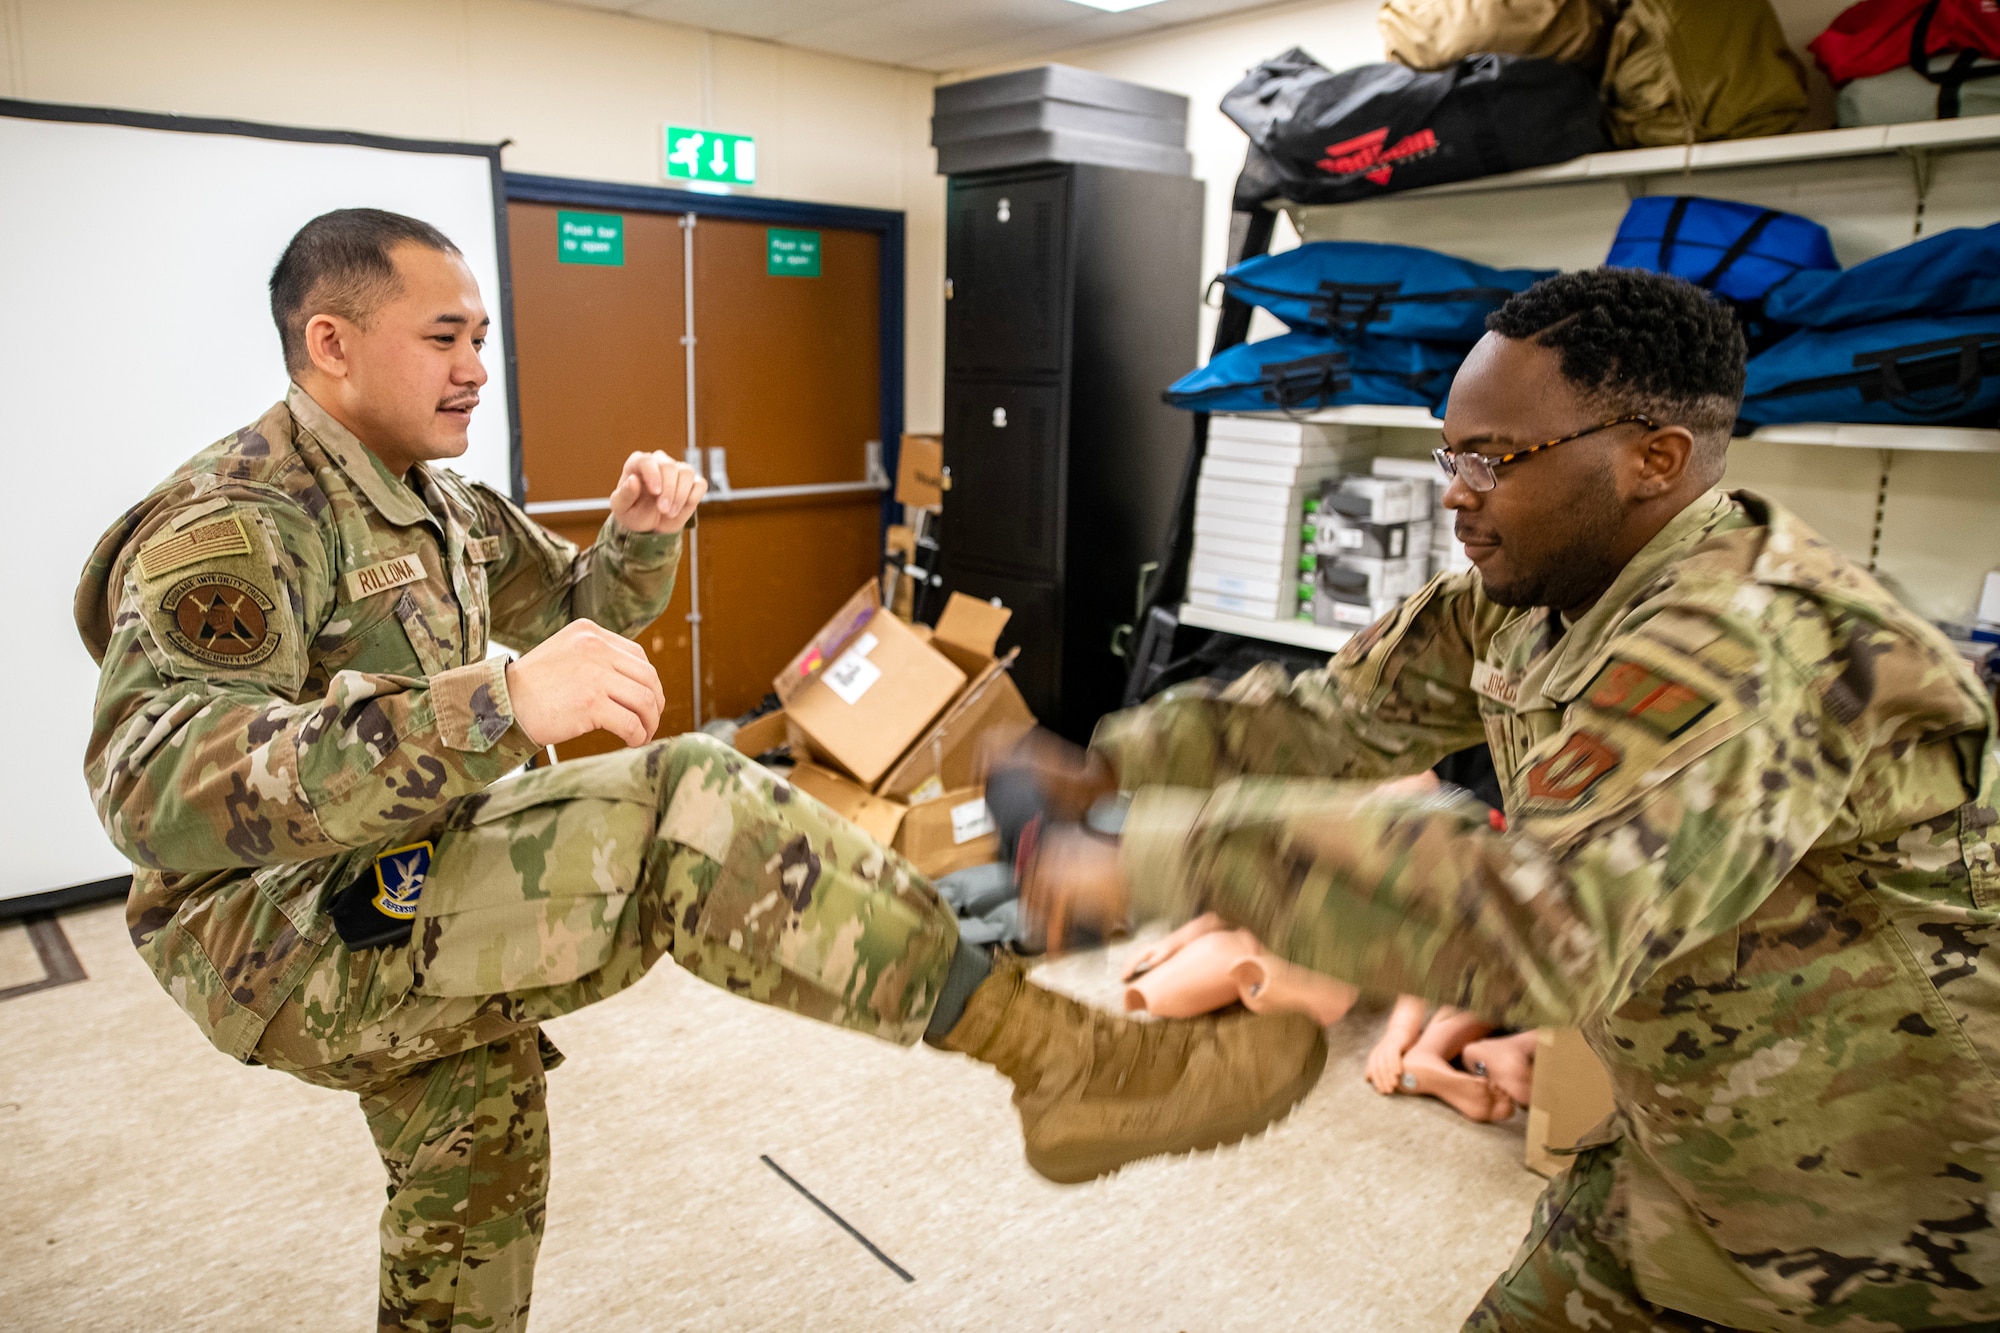 An Airman from the 423d Security Forces Squadron, right, demonstrates a baton block during a non-lethal combatives qualification course at RAF Alconbury, England, Feb. 7, 2023. The course provided Defenders with the skills and knowledge to properly detain a suspect using non-lethal combative methods. (U.S. Air Force photo by Staff Sgt. Eugene Oliver)